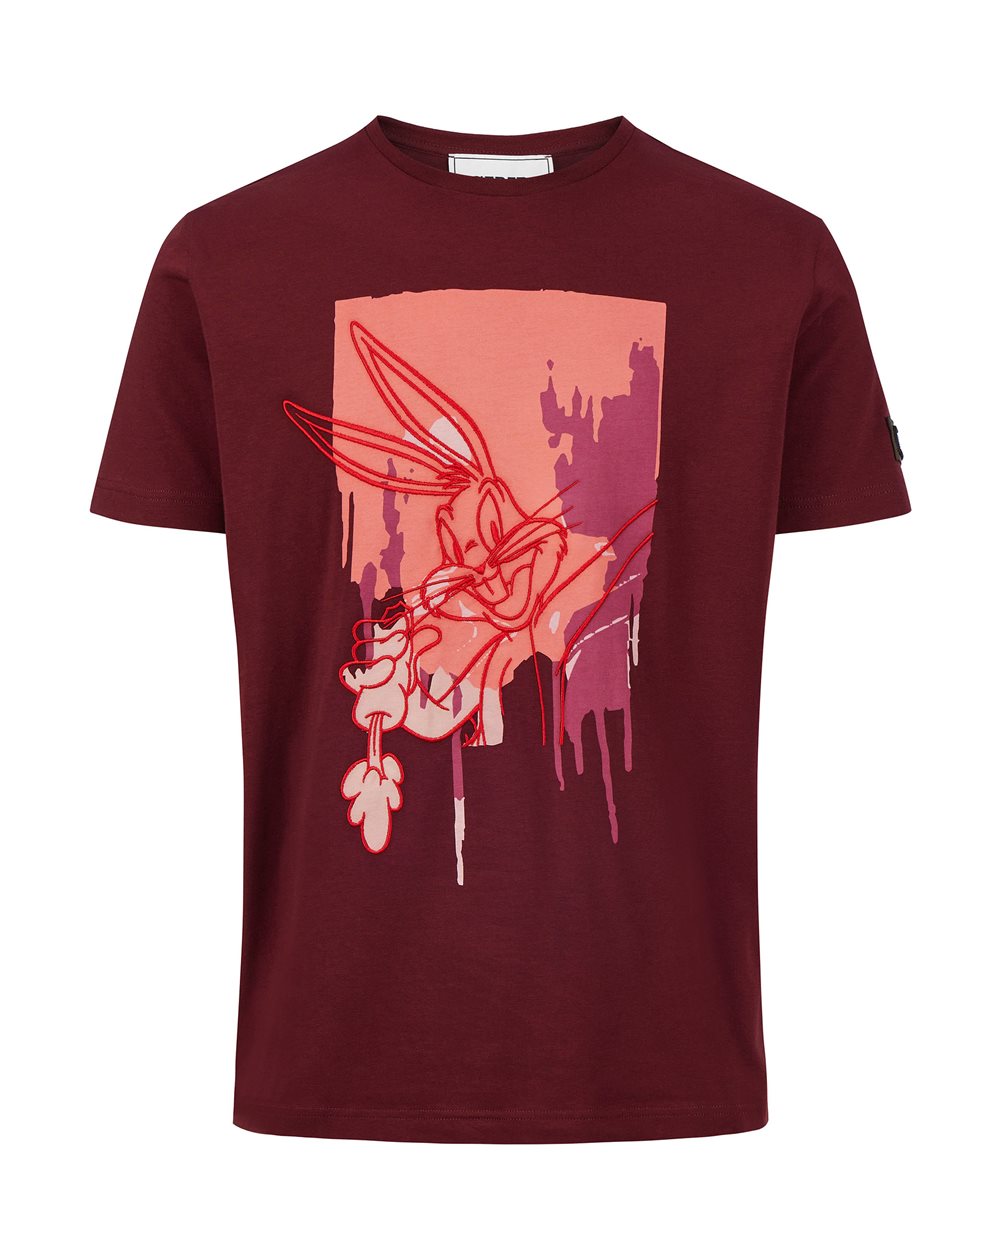 Bordeaux T-shirt with cartoon details - Clothing | Iceberg - Official Website